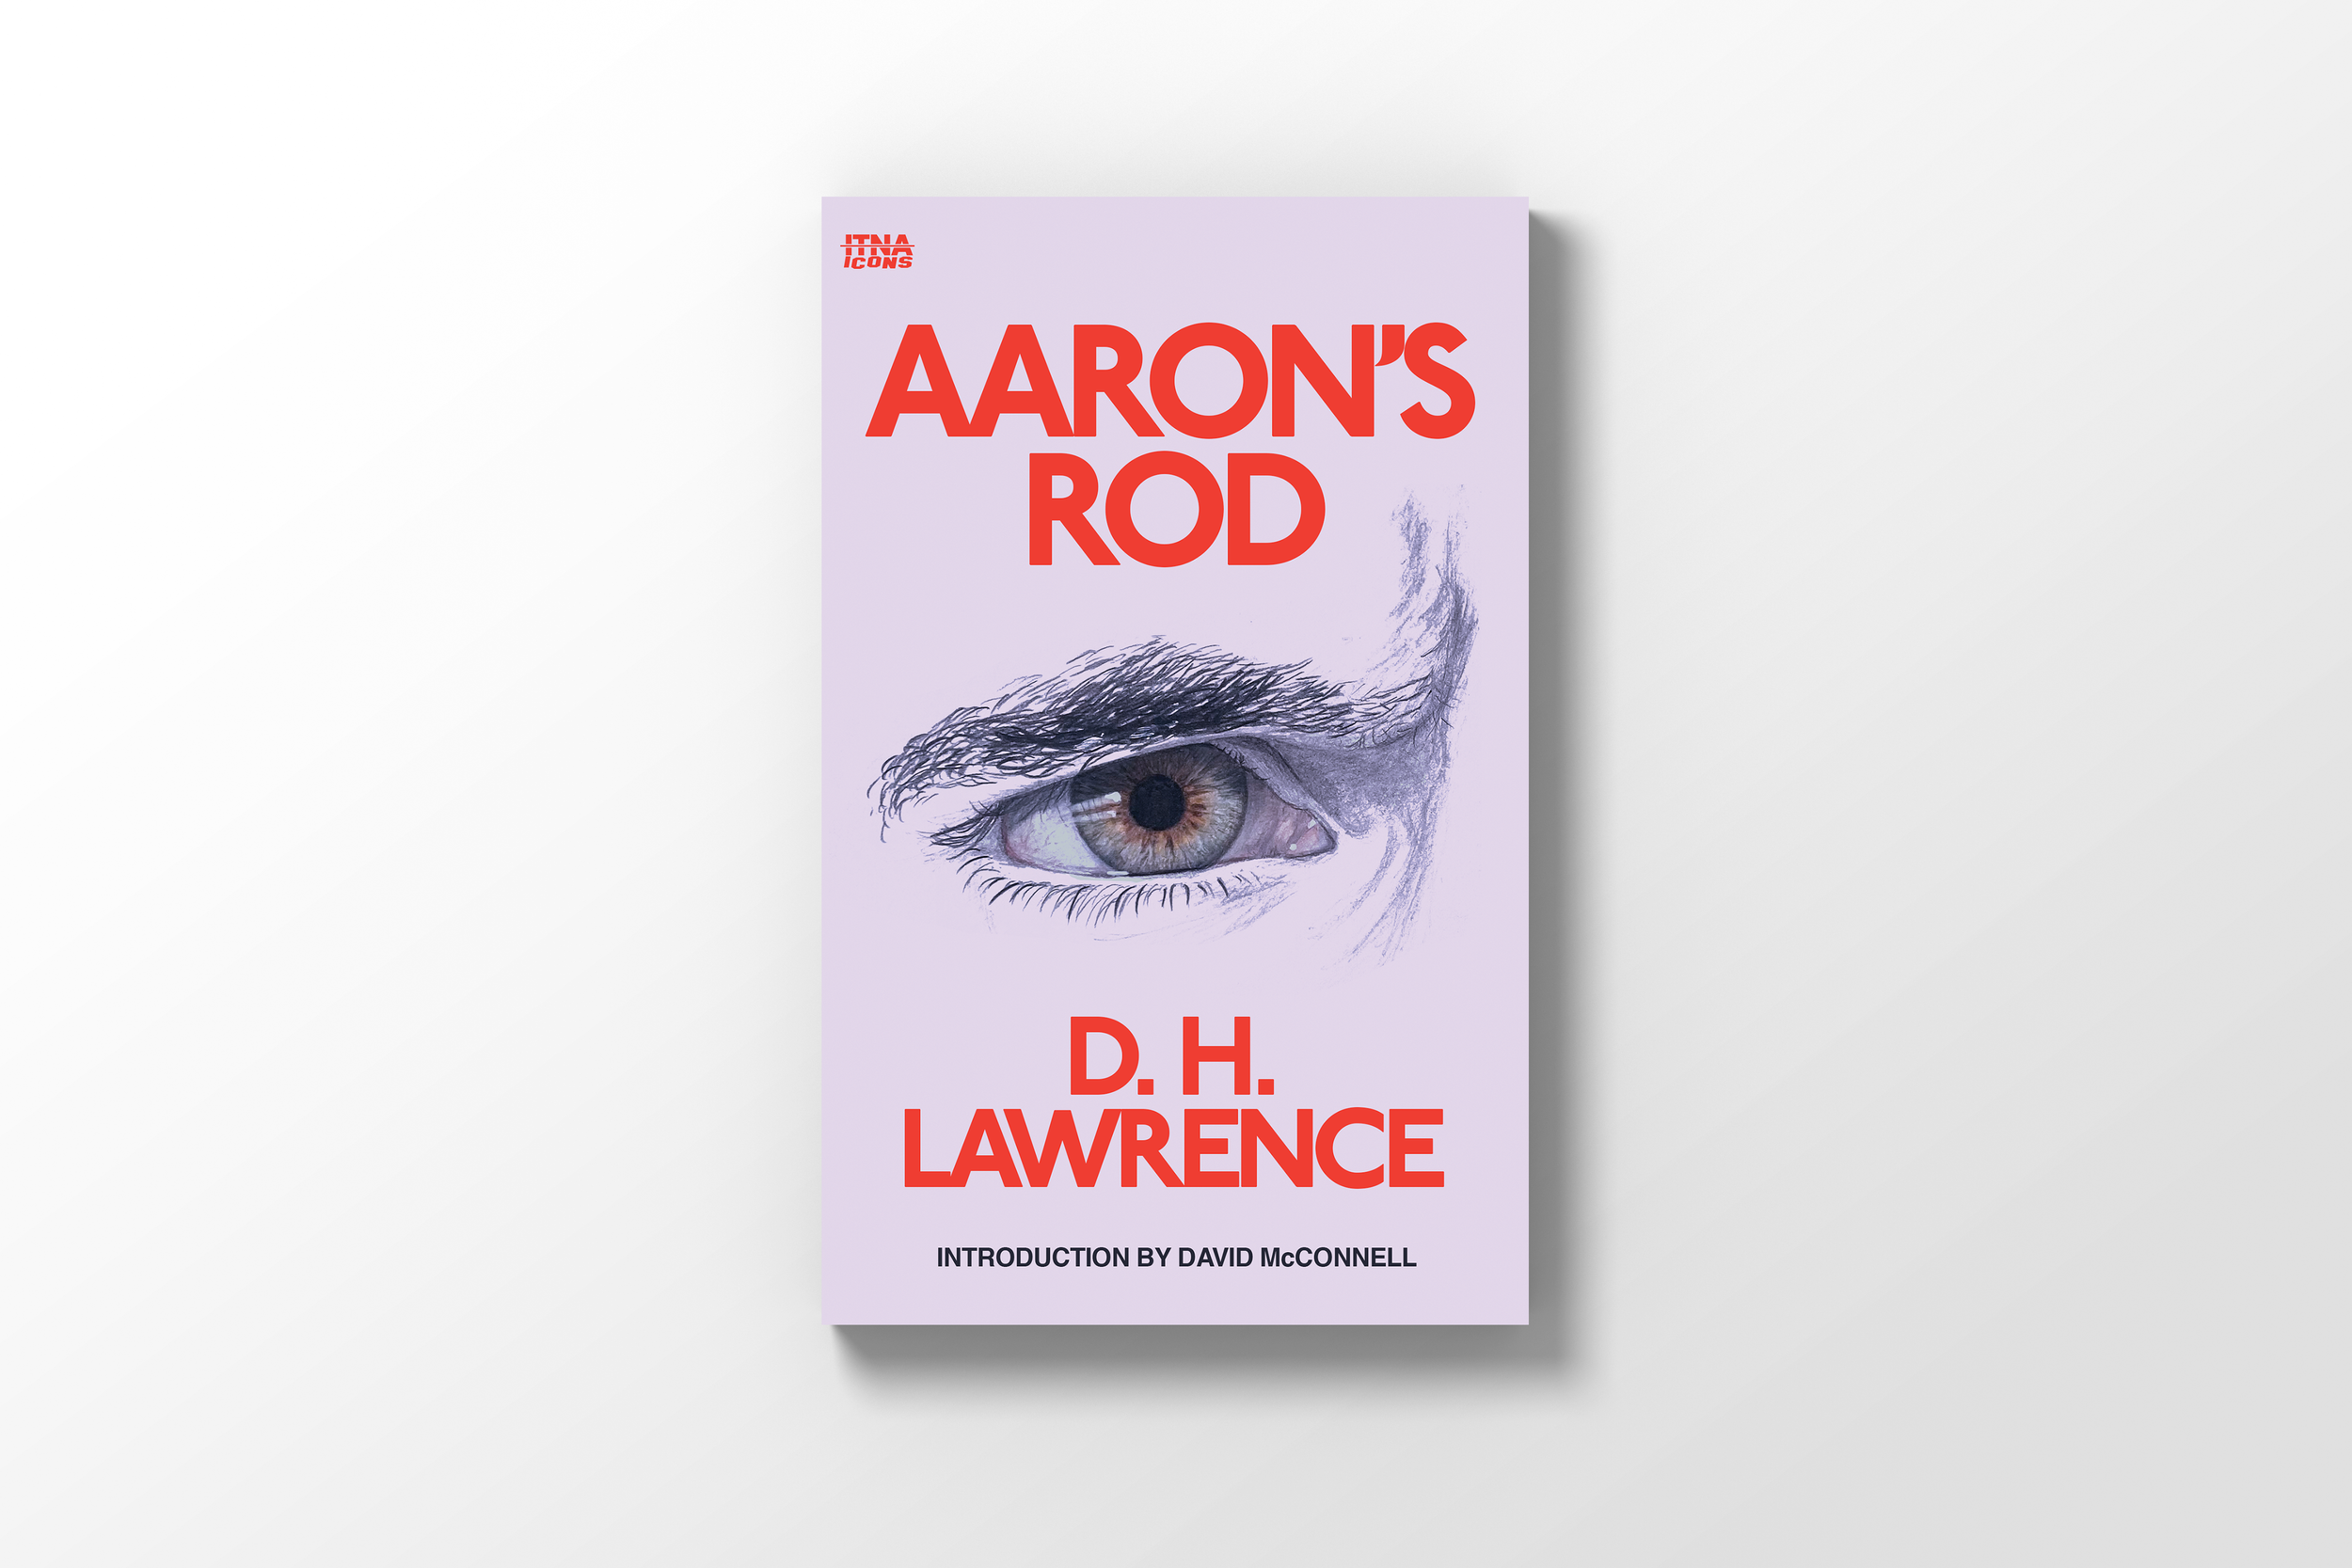 AARON'S ROD | D. H. Lawrence